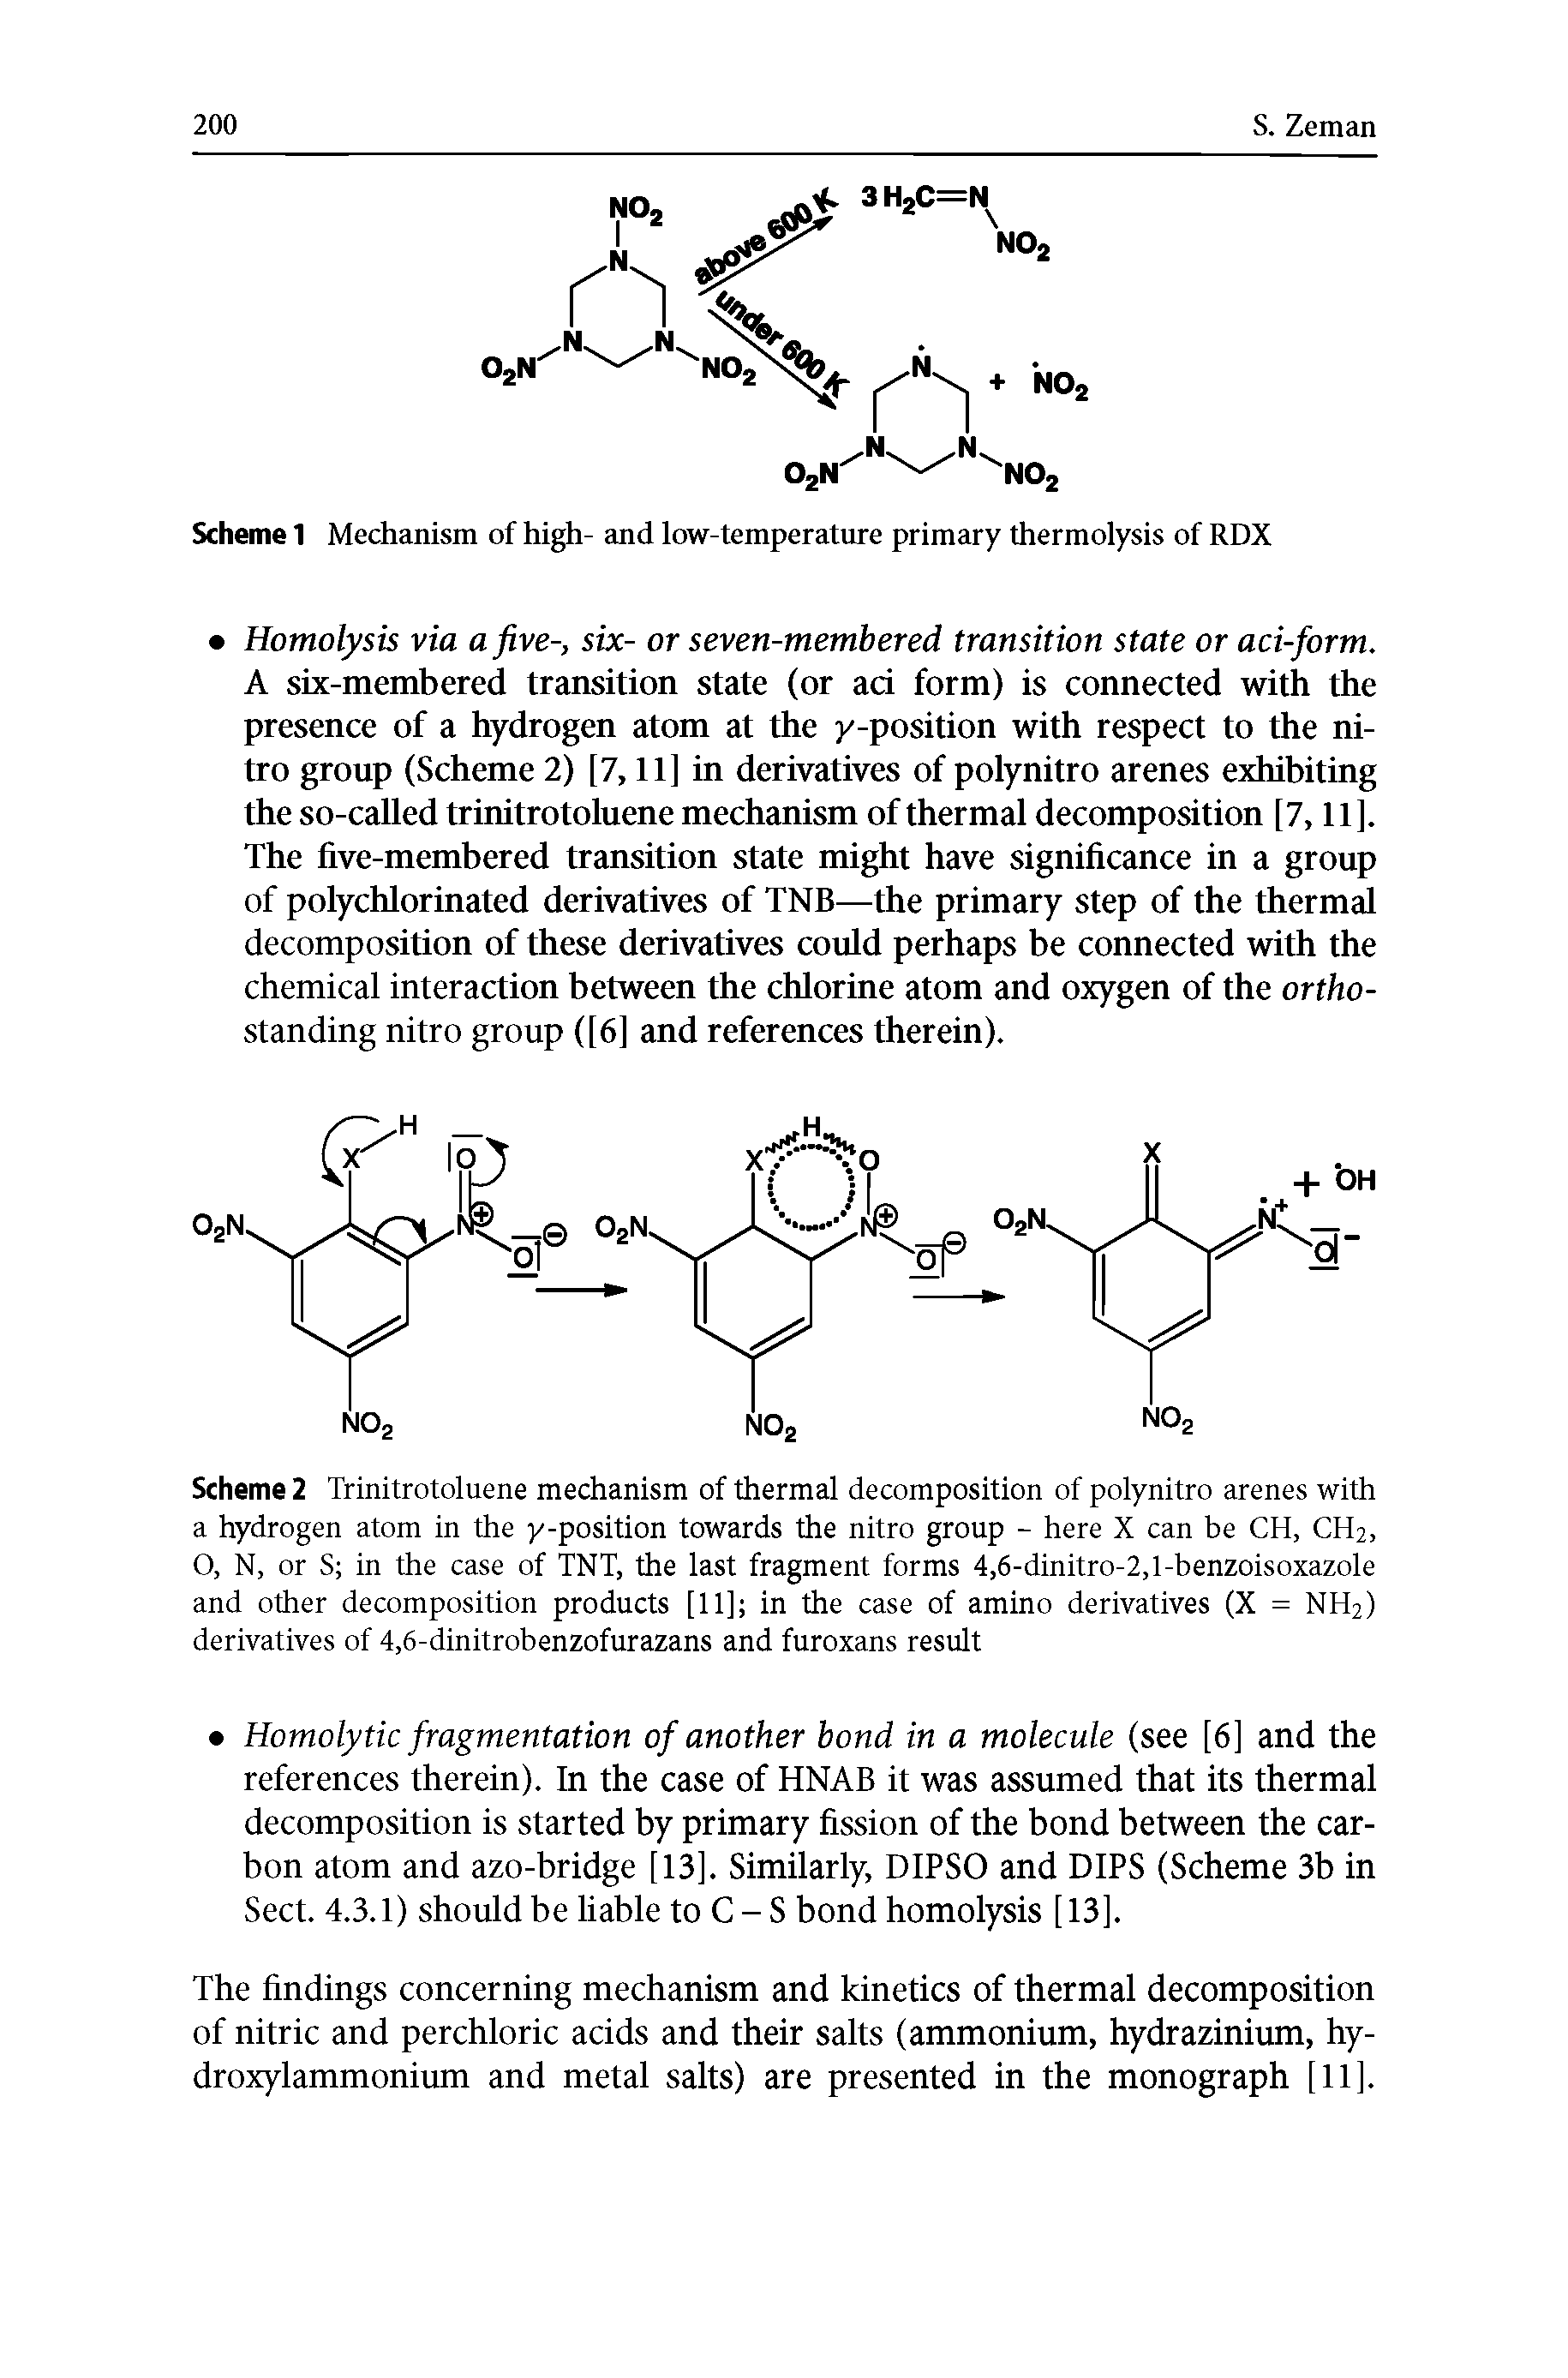 Scheme 2 Trinitrotoluene mechanism of thermal decomposition of polynitro arenes with a hydrogen atom in the y-position towards the nitro group - here X can be CH, CH2, O, N, or S in the case of TNT, the last fragment forms 4,6-dinitro-2,l-benzoisoxazole and other decomposition products [11] in the case of amino derivatives (X = NH2) derivatives of 4,6-dinitrobenzofurazans and furoxans result...